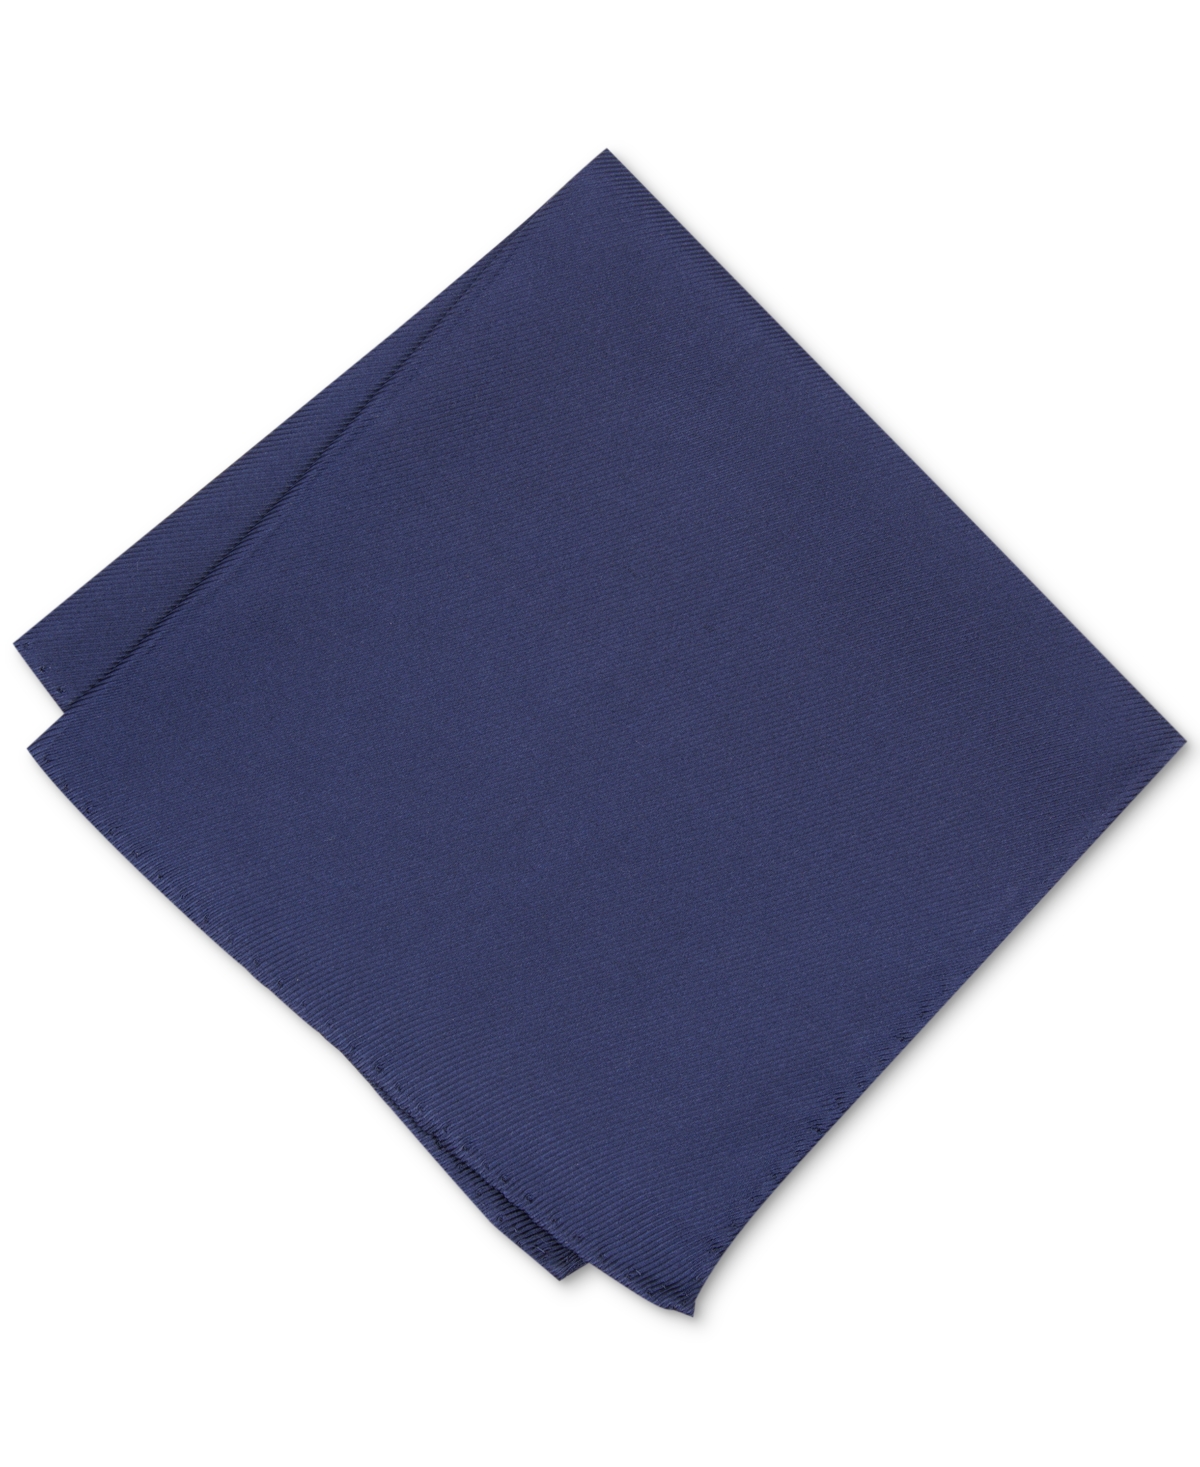 Men's Solid Pocket Square, Created for Macy's - Champagne